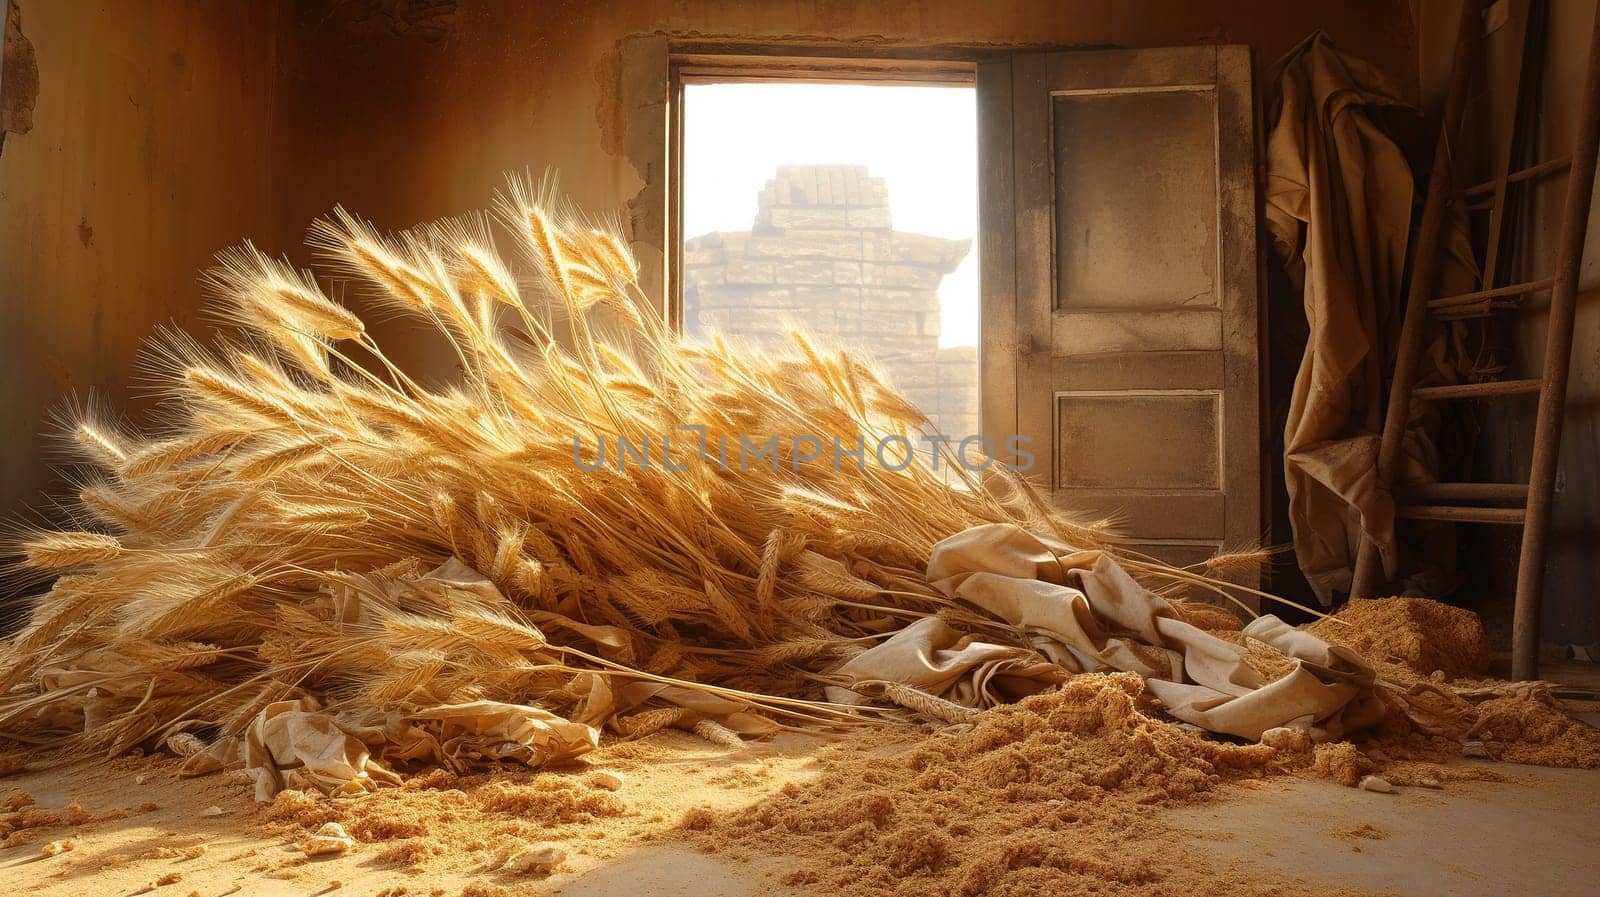 abandoned warehouse with wheat,grain on the floor spilling out of bags torn by rodents,food storage violation, by KaterinaDalemans